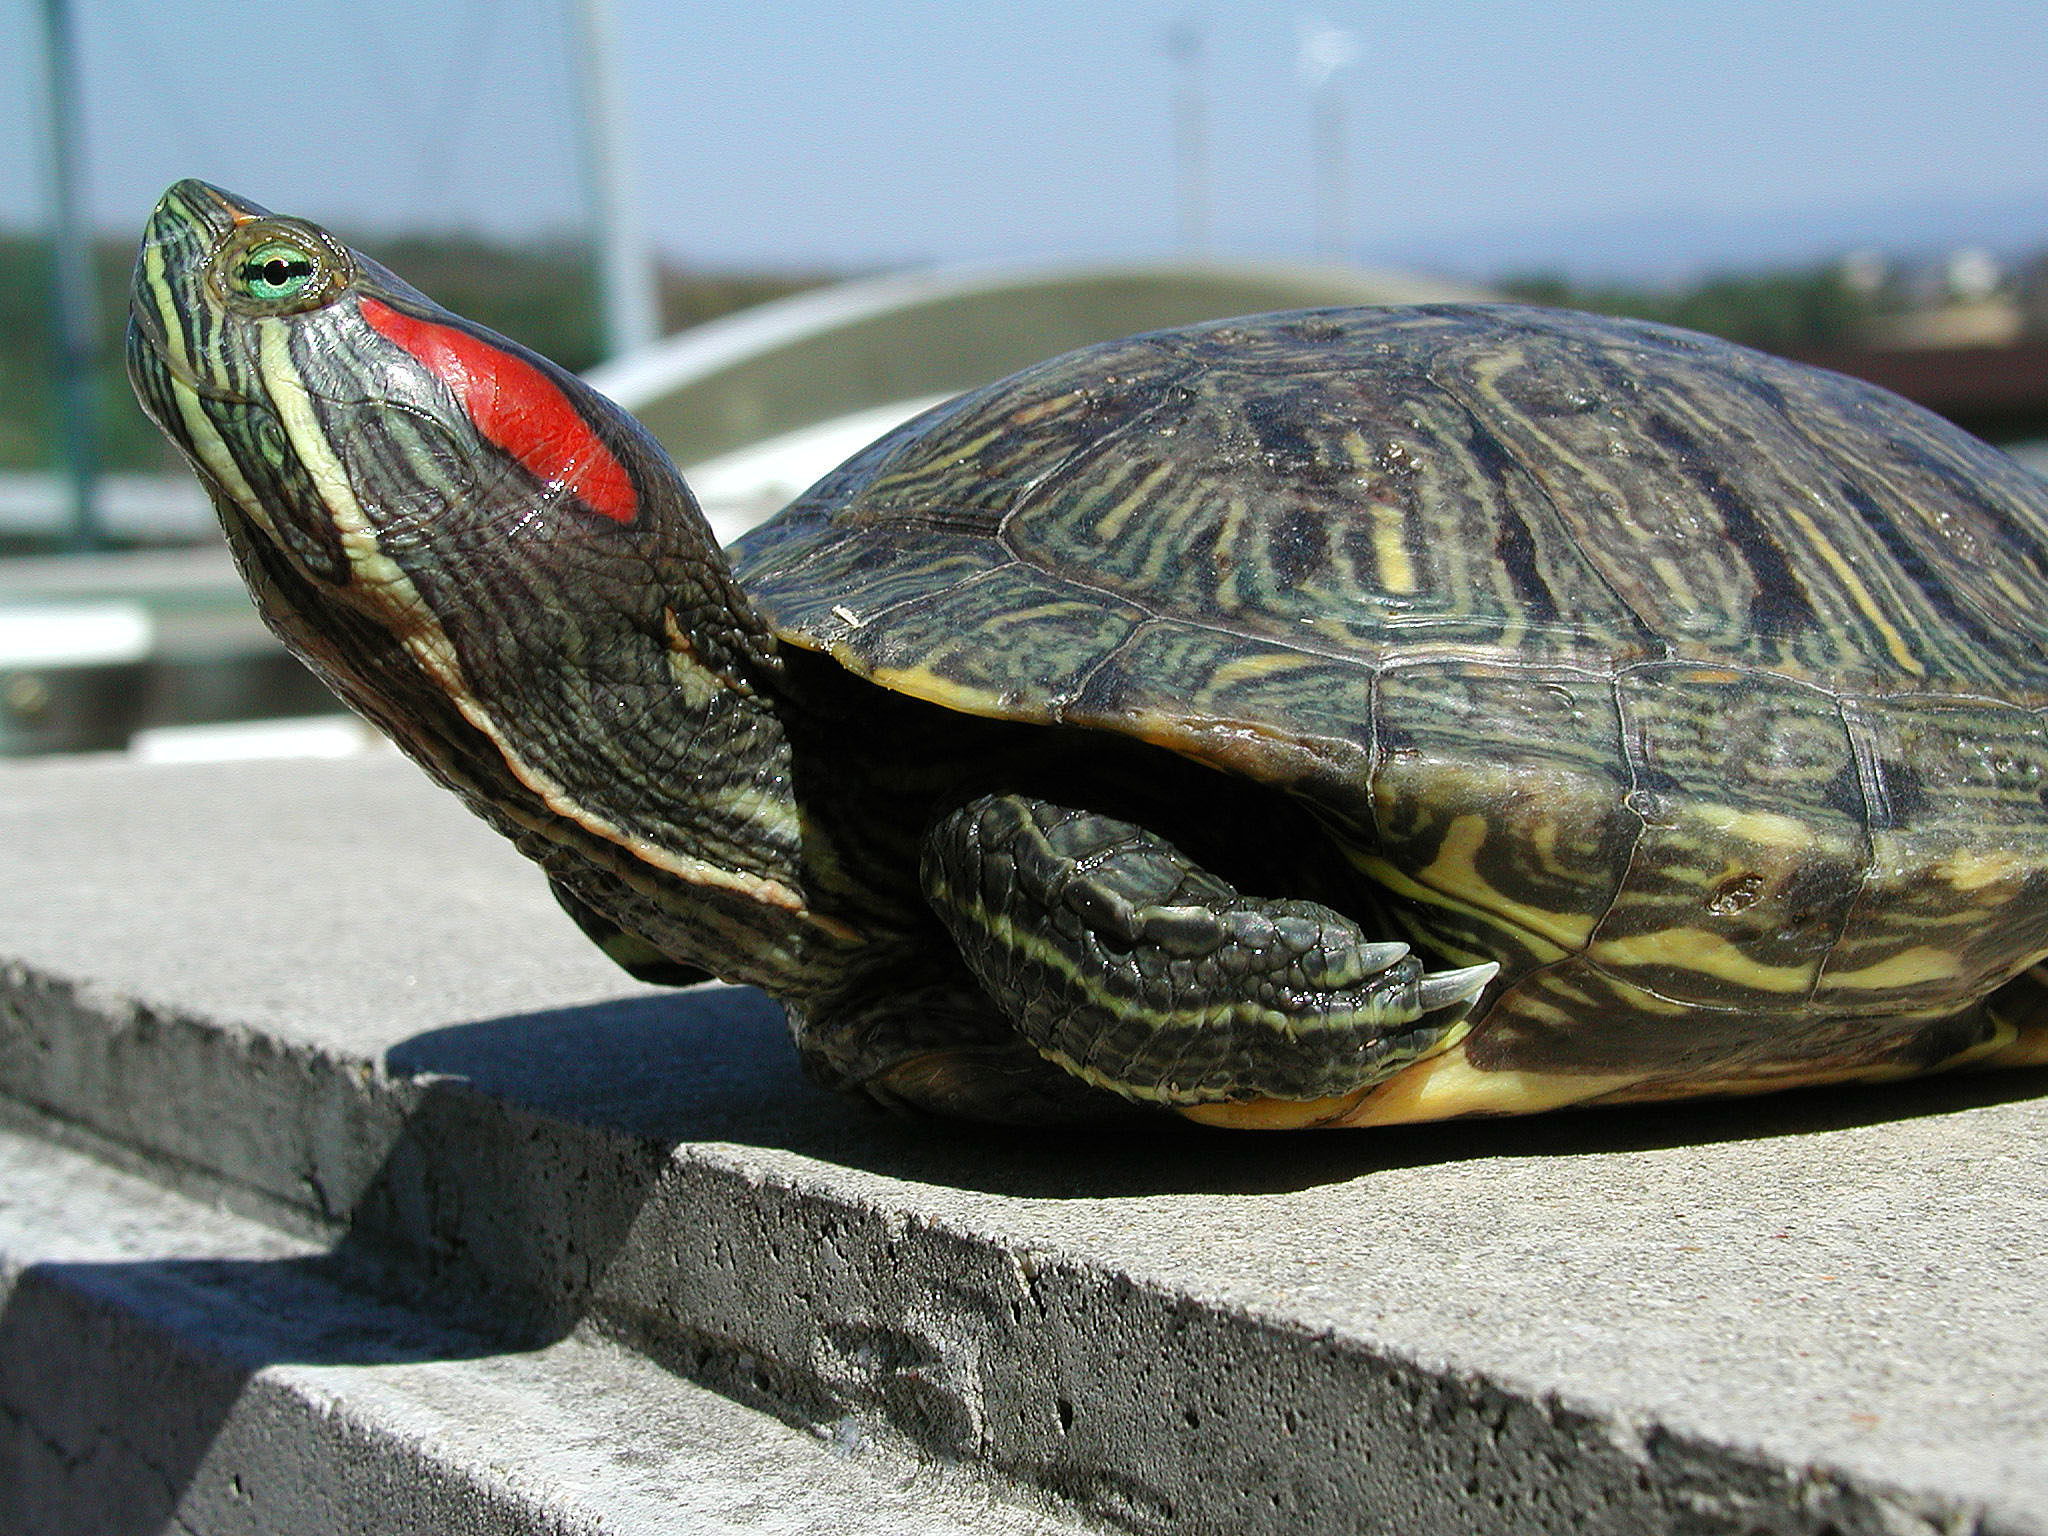 Japan has 8 million invasive red-eared sliders, seen here, and only around 1 million endemic turtles. | KYODO